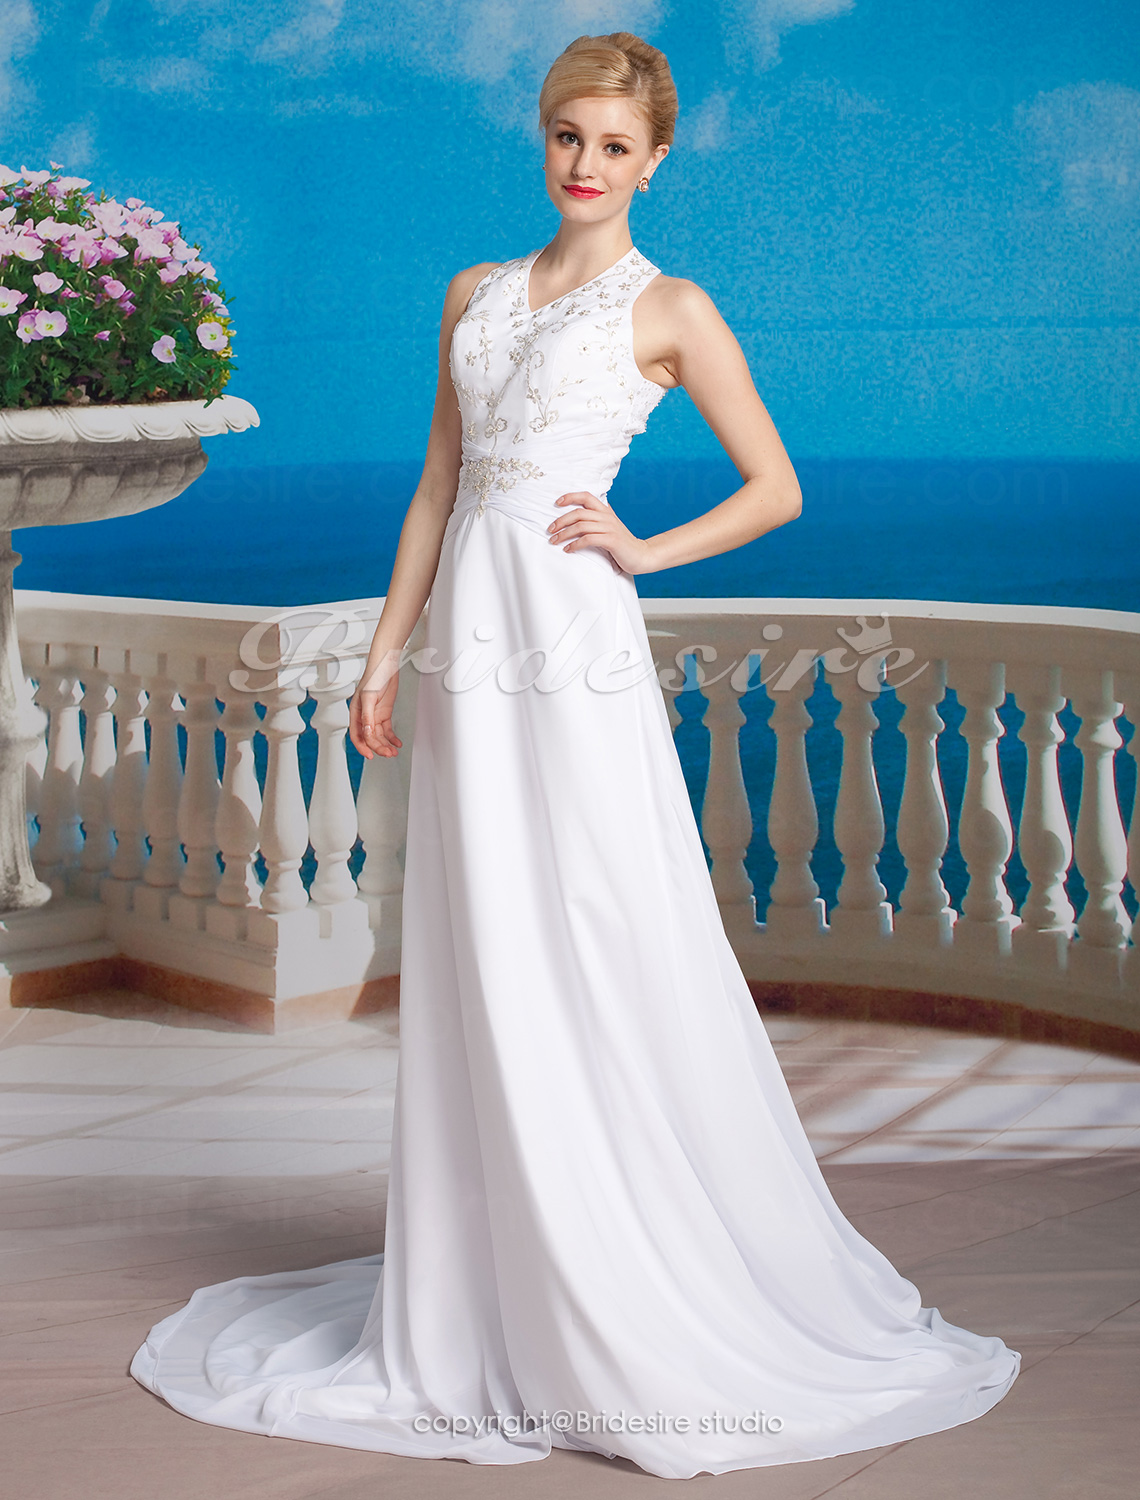 Sheath/Column Chiffon Wedding Dress with Button Back and Beaded Embroidered